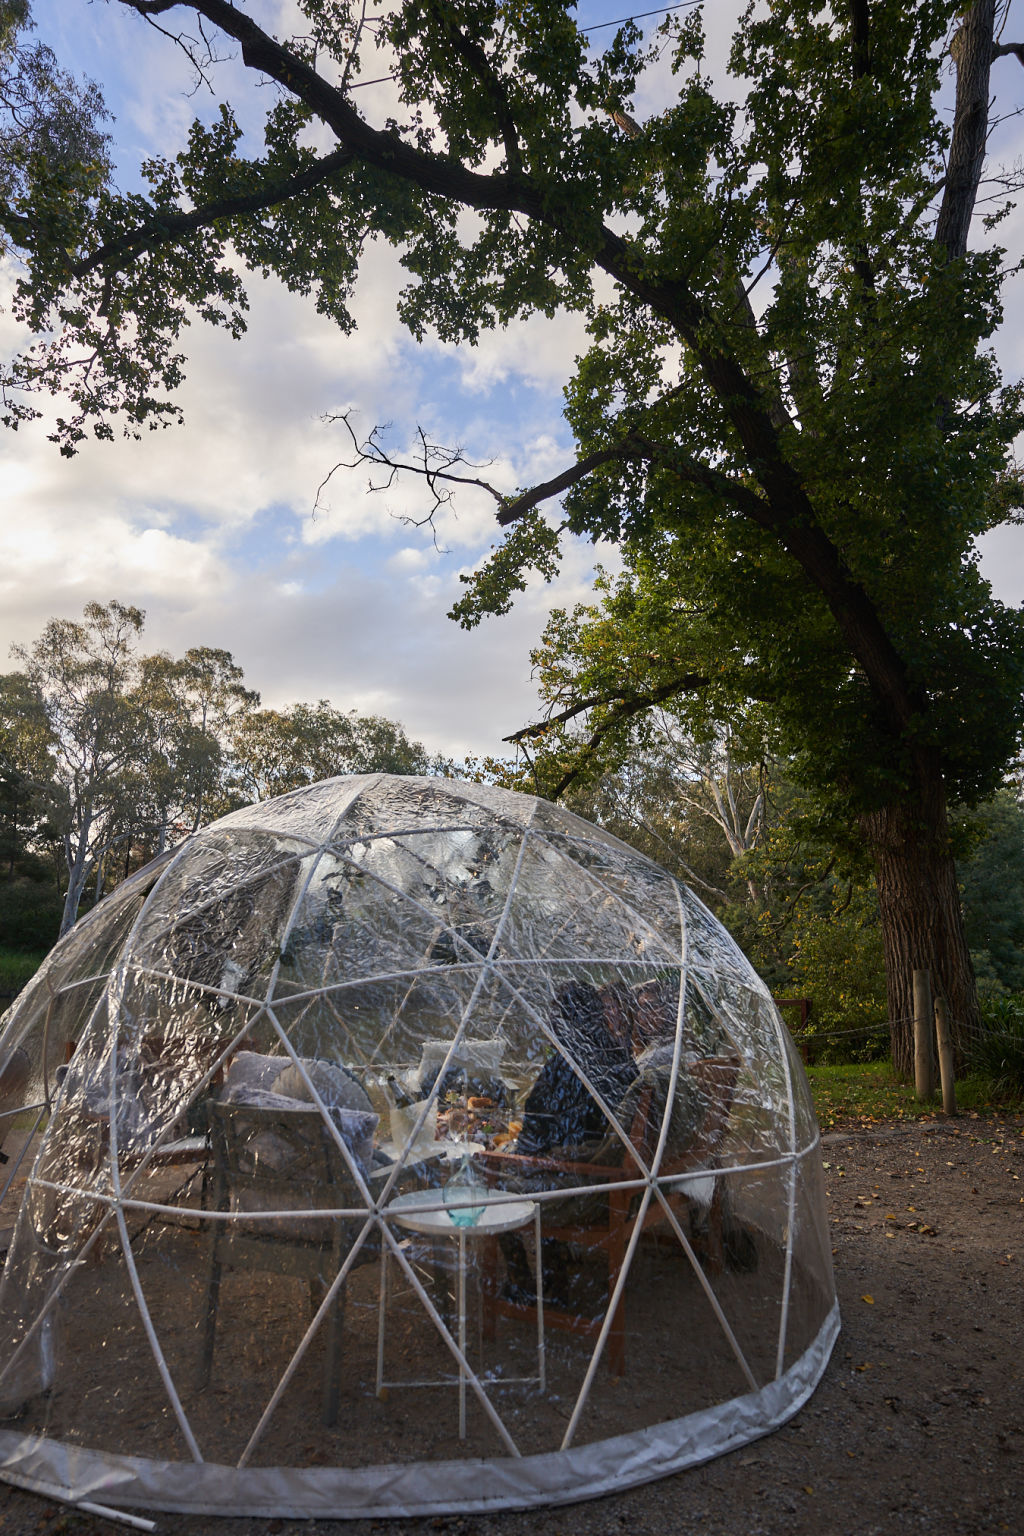 Studley Park Boathouse serves high tea in private igloos under the oak trees at Studley Park.